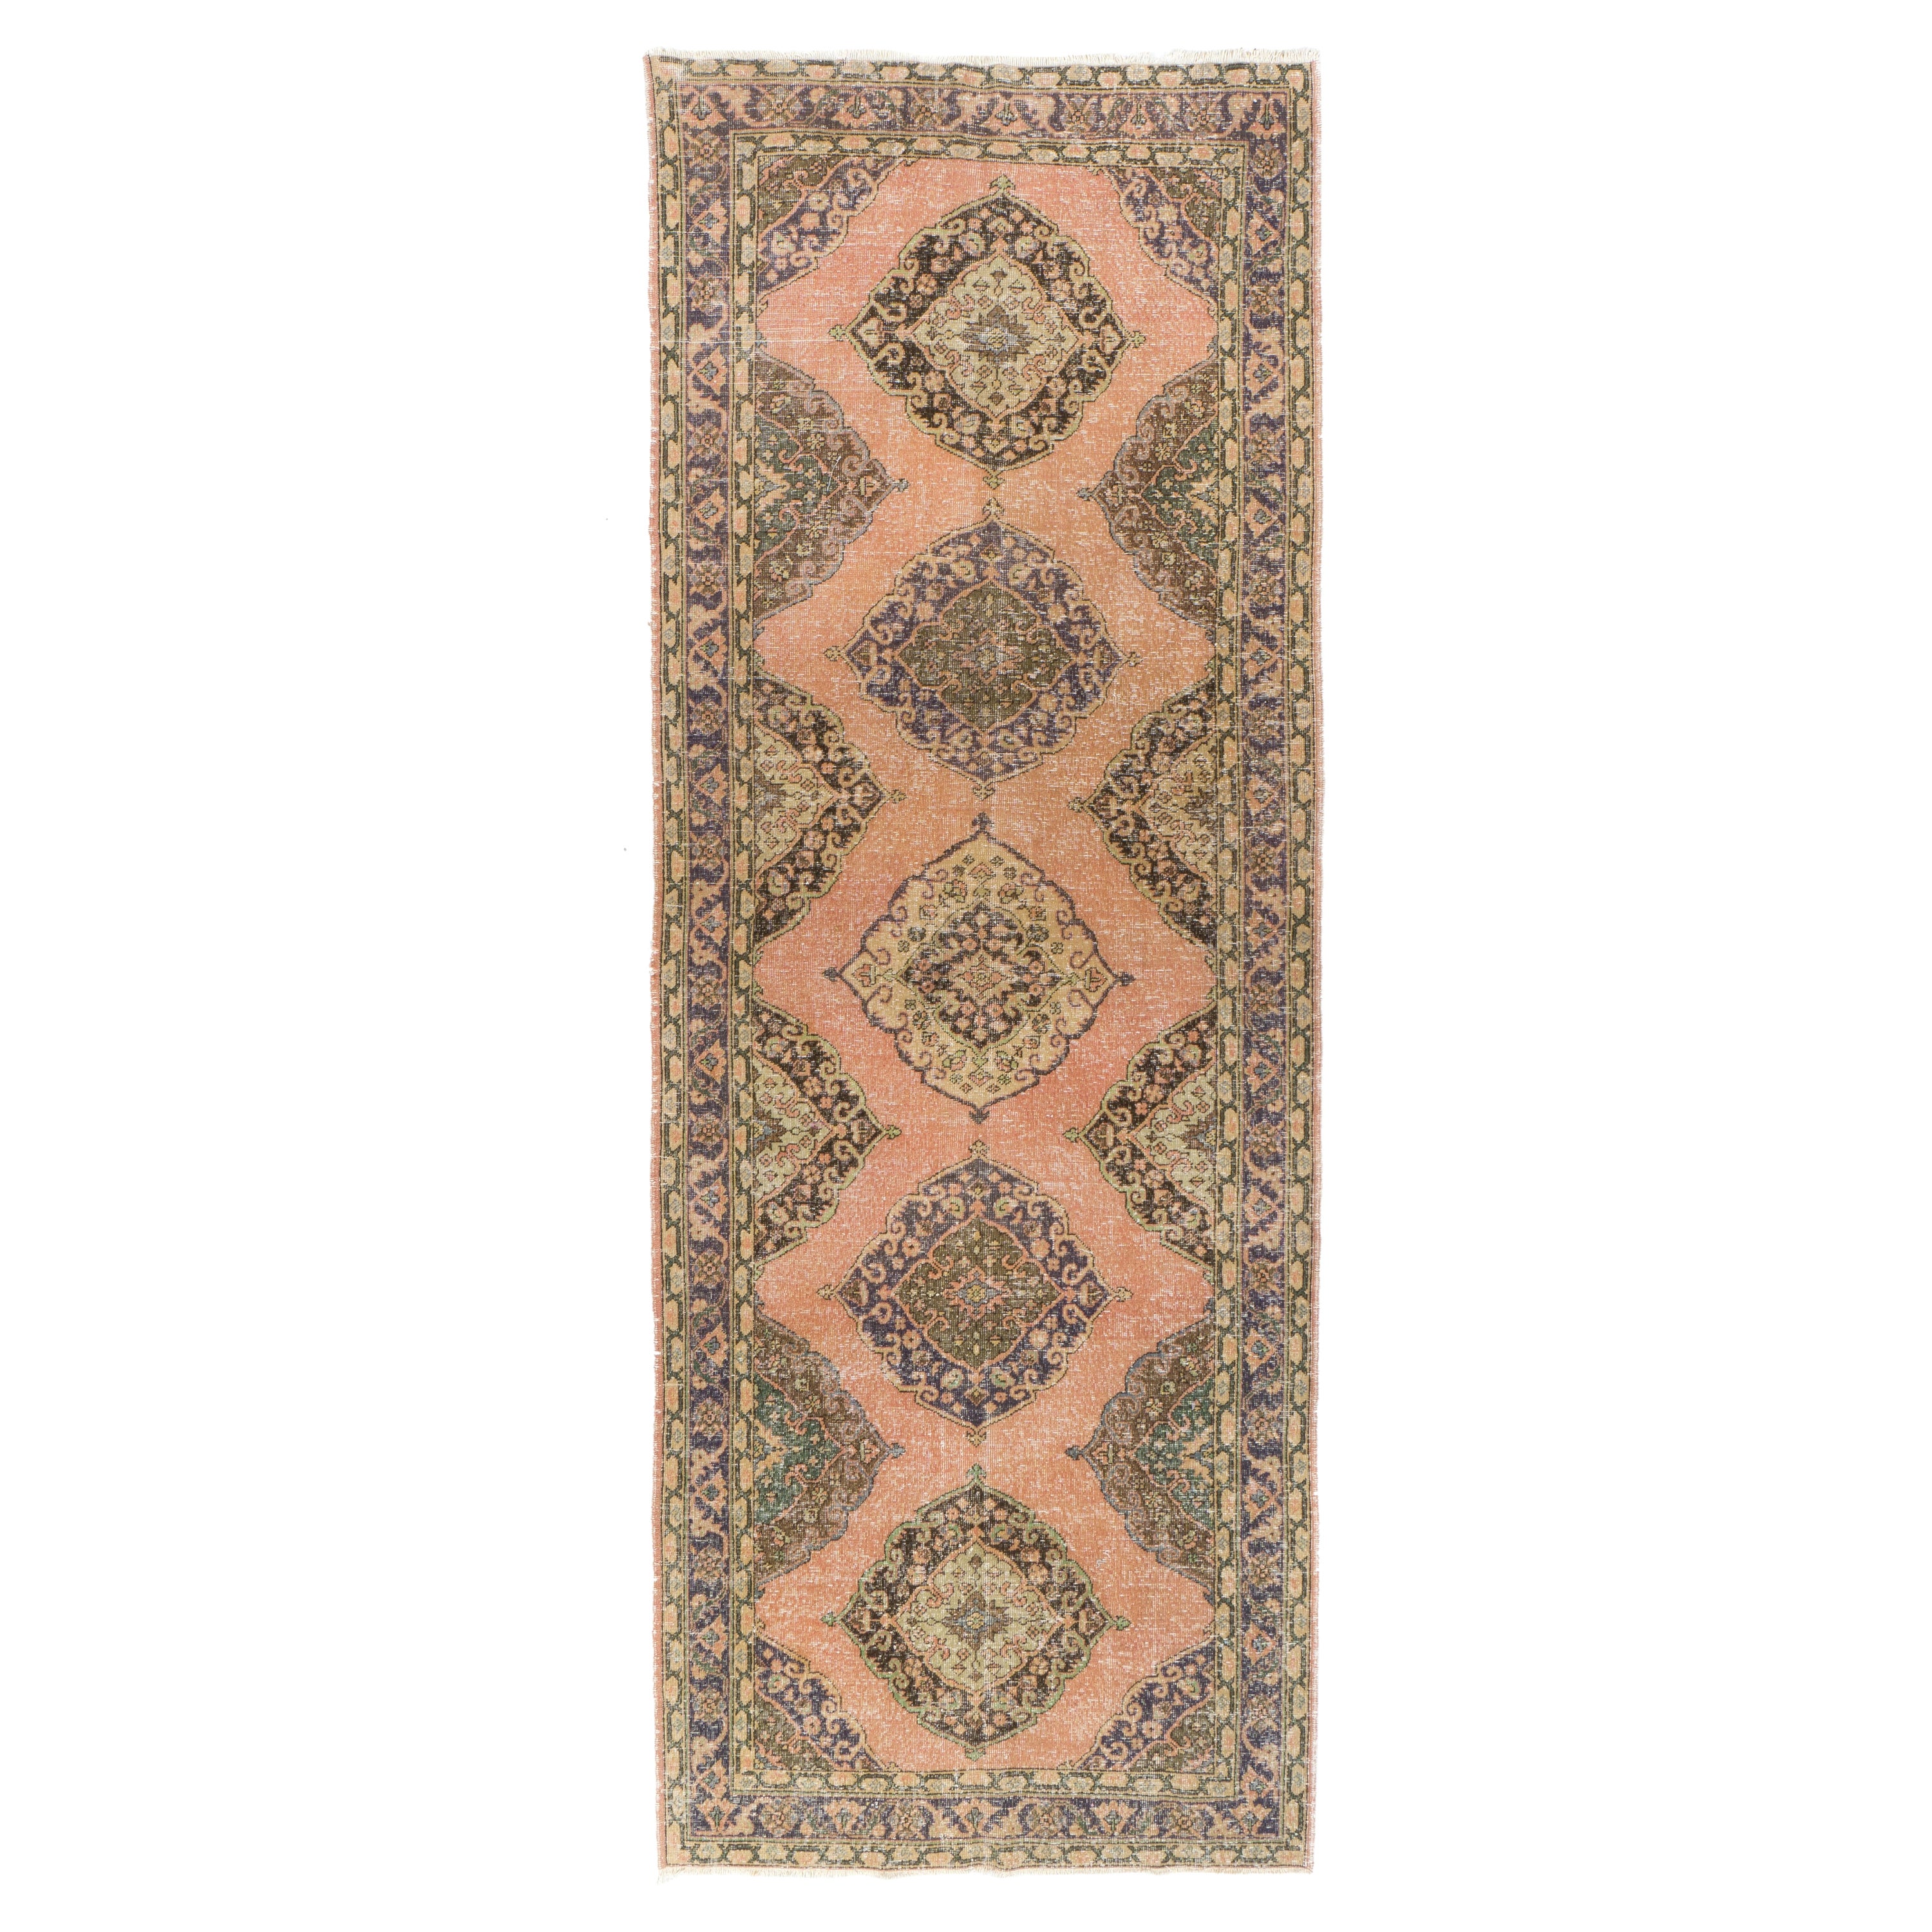 4.7x13.2 Ft Traditional Hand Knotted Runner Rug. Unique Vintage Corridor Carpet